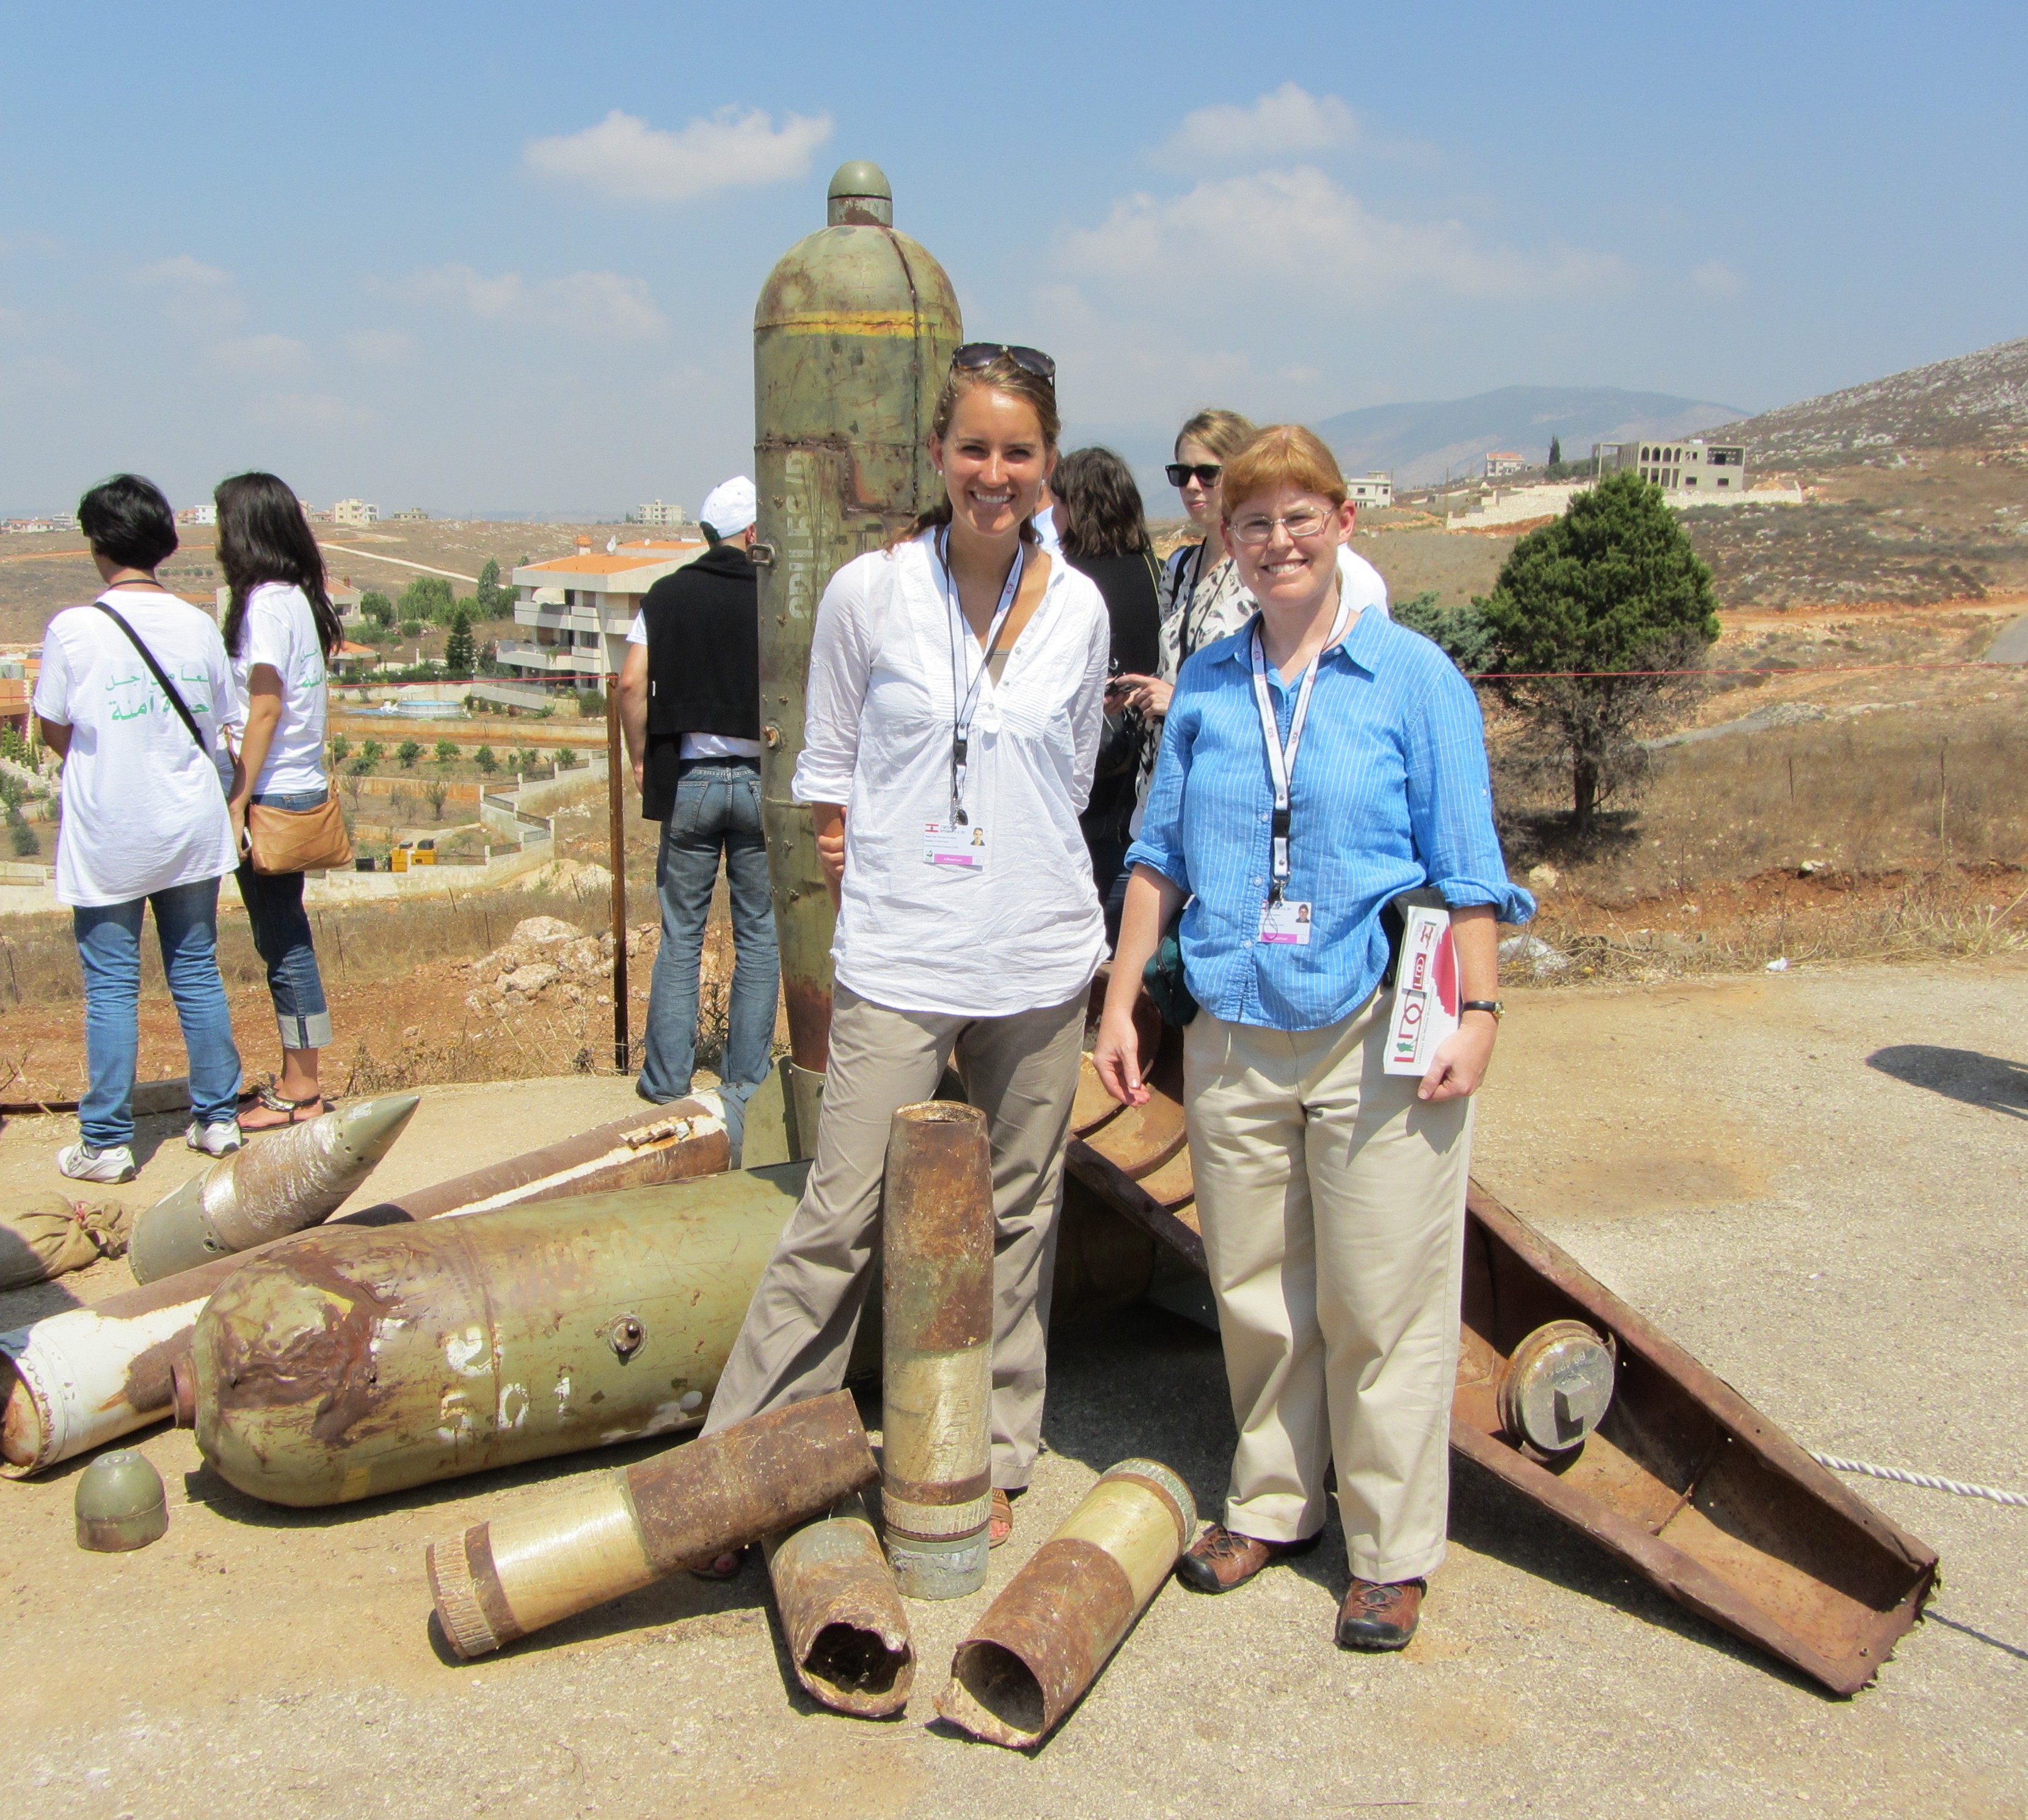 Two women stand smiling in a hot desert landscape; they stand over large rusty shells that look like weapons.